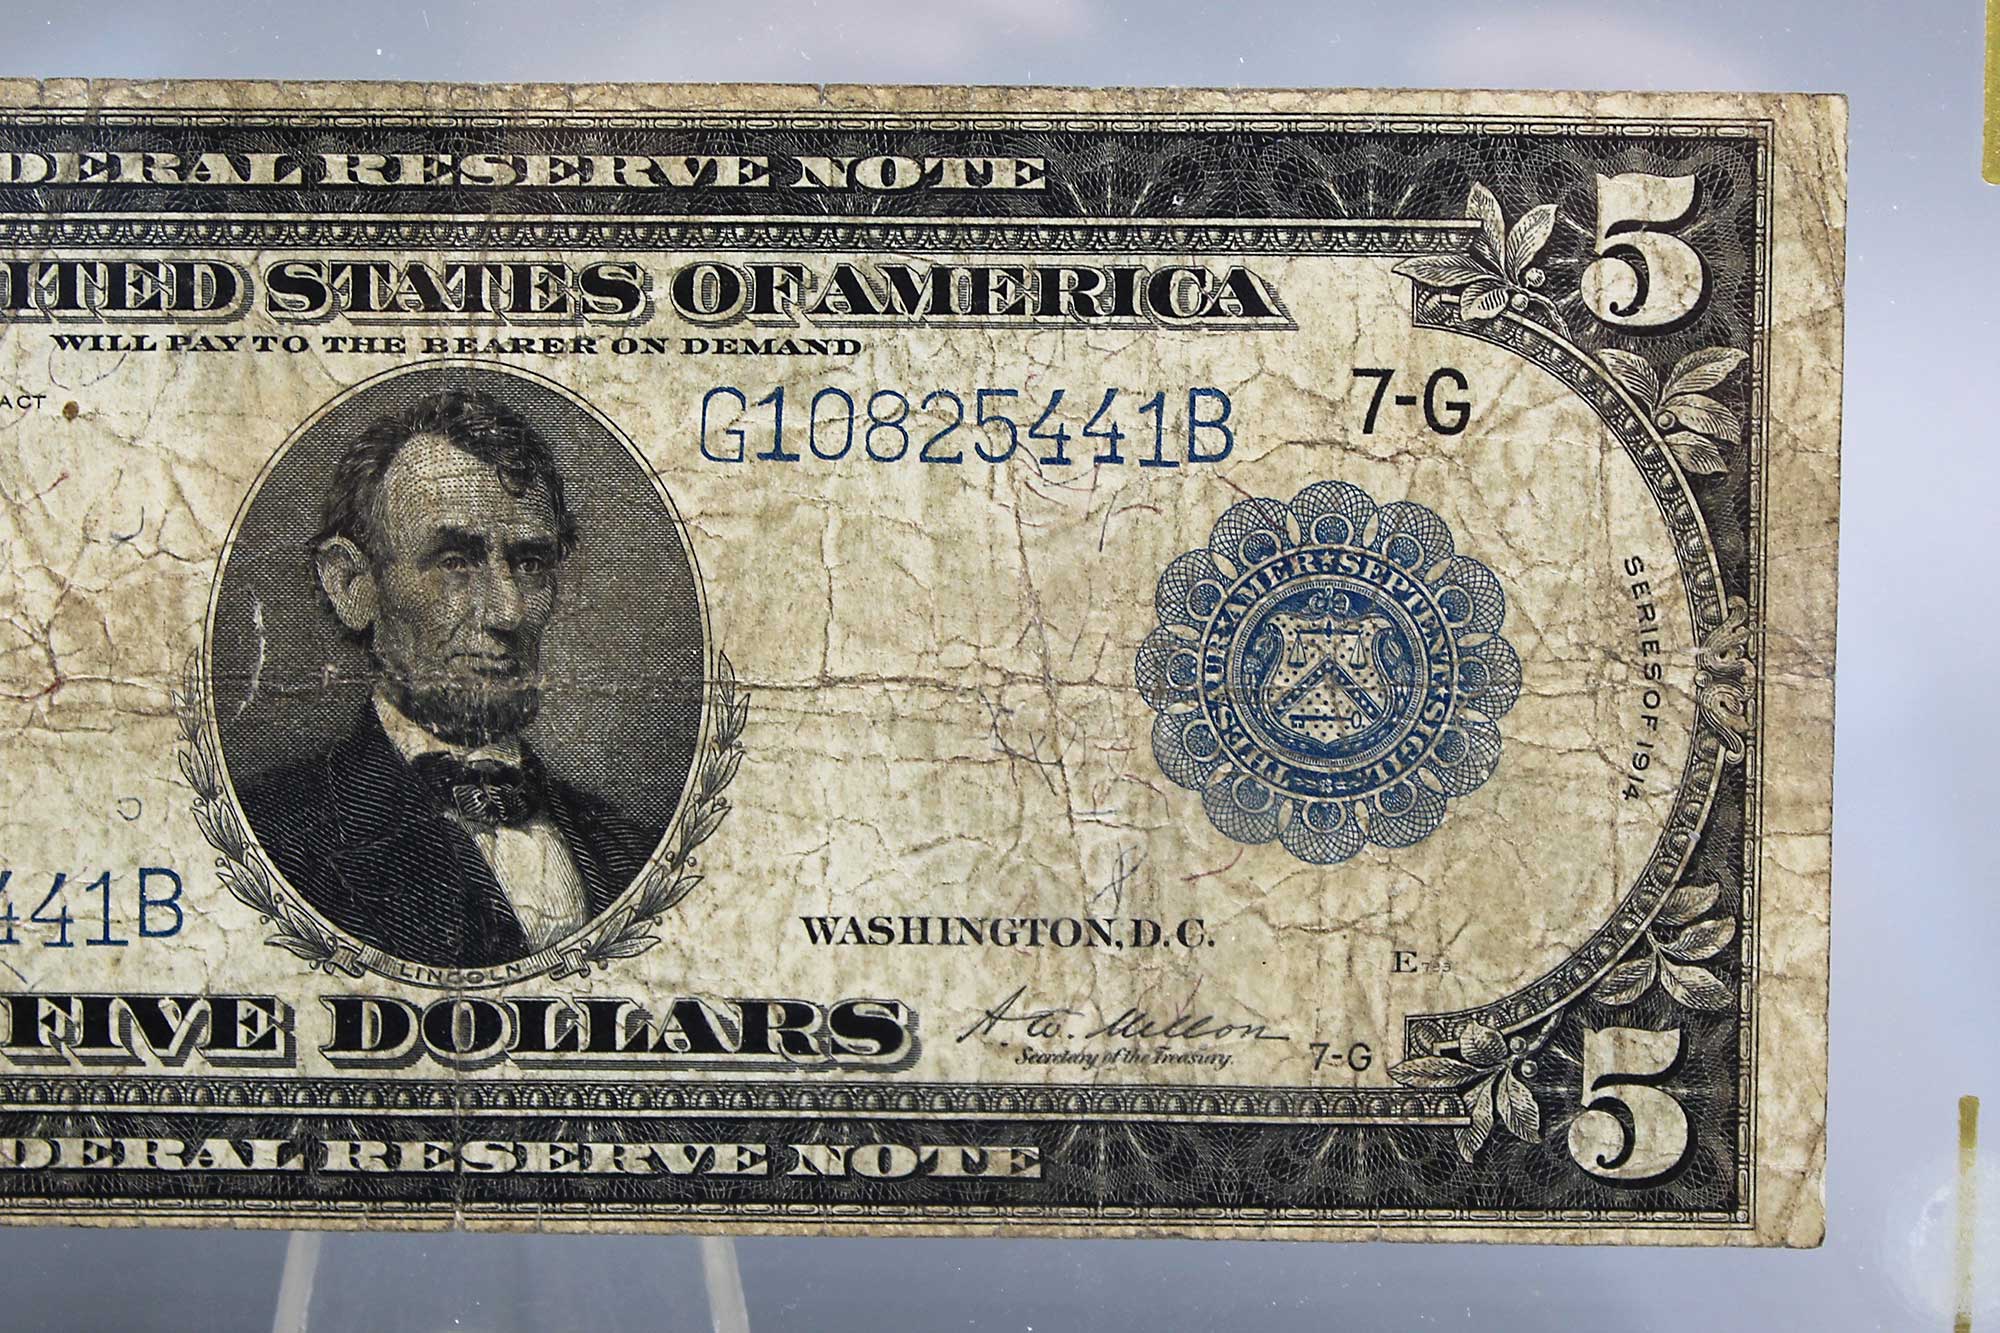 Series 1914 $5 Federal Reserve Note